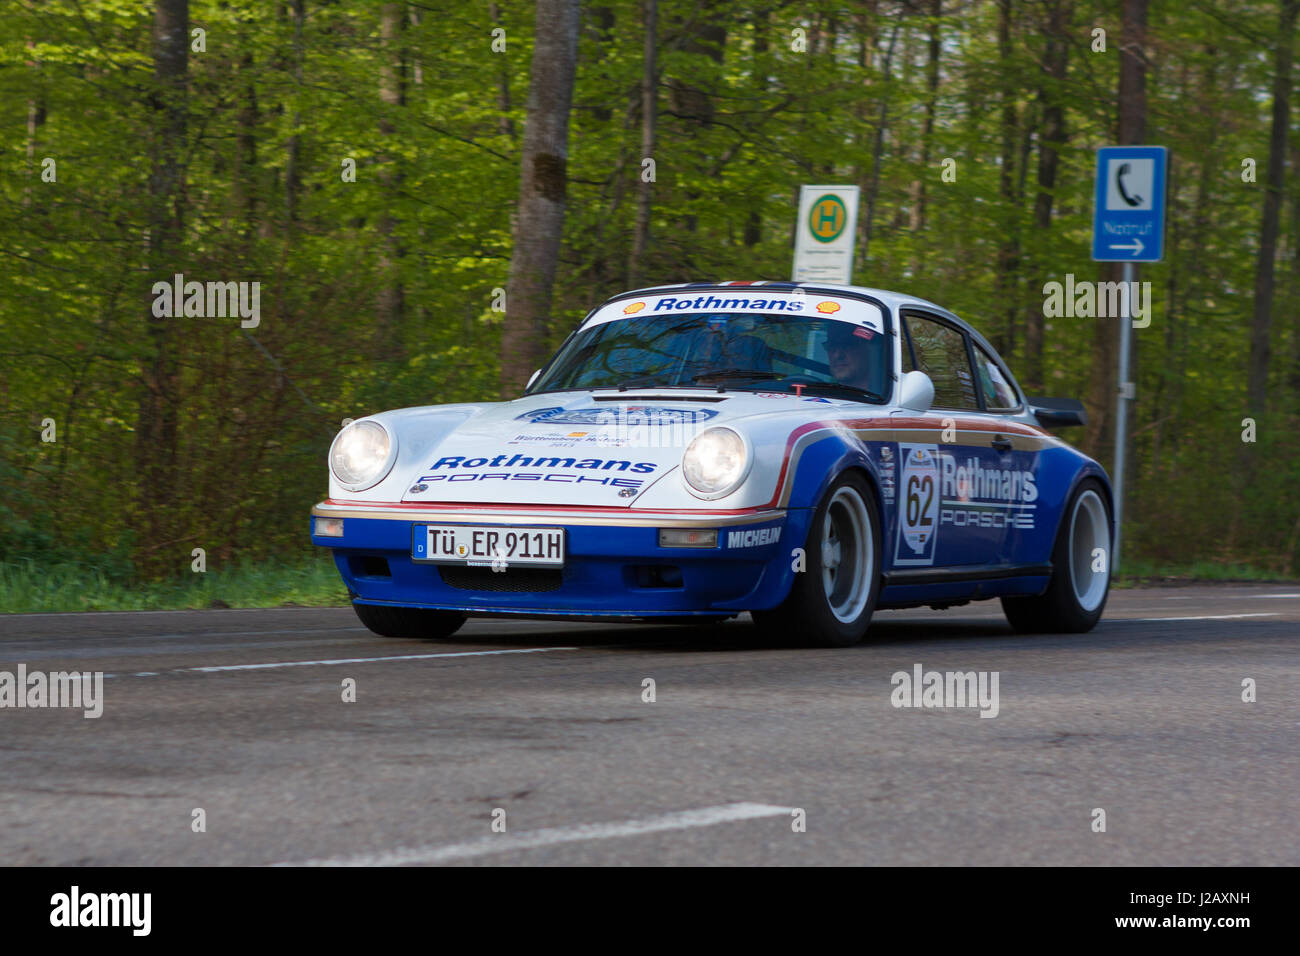 HEIDENHEIM, GERMANY - MAY 4, 2013: Ernst Richter and Annette Friess in their 1981 Rothmans Porsche 911 at the ADAC Wurttemberg Historic Rallye 2013 on Stock Photo